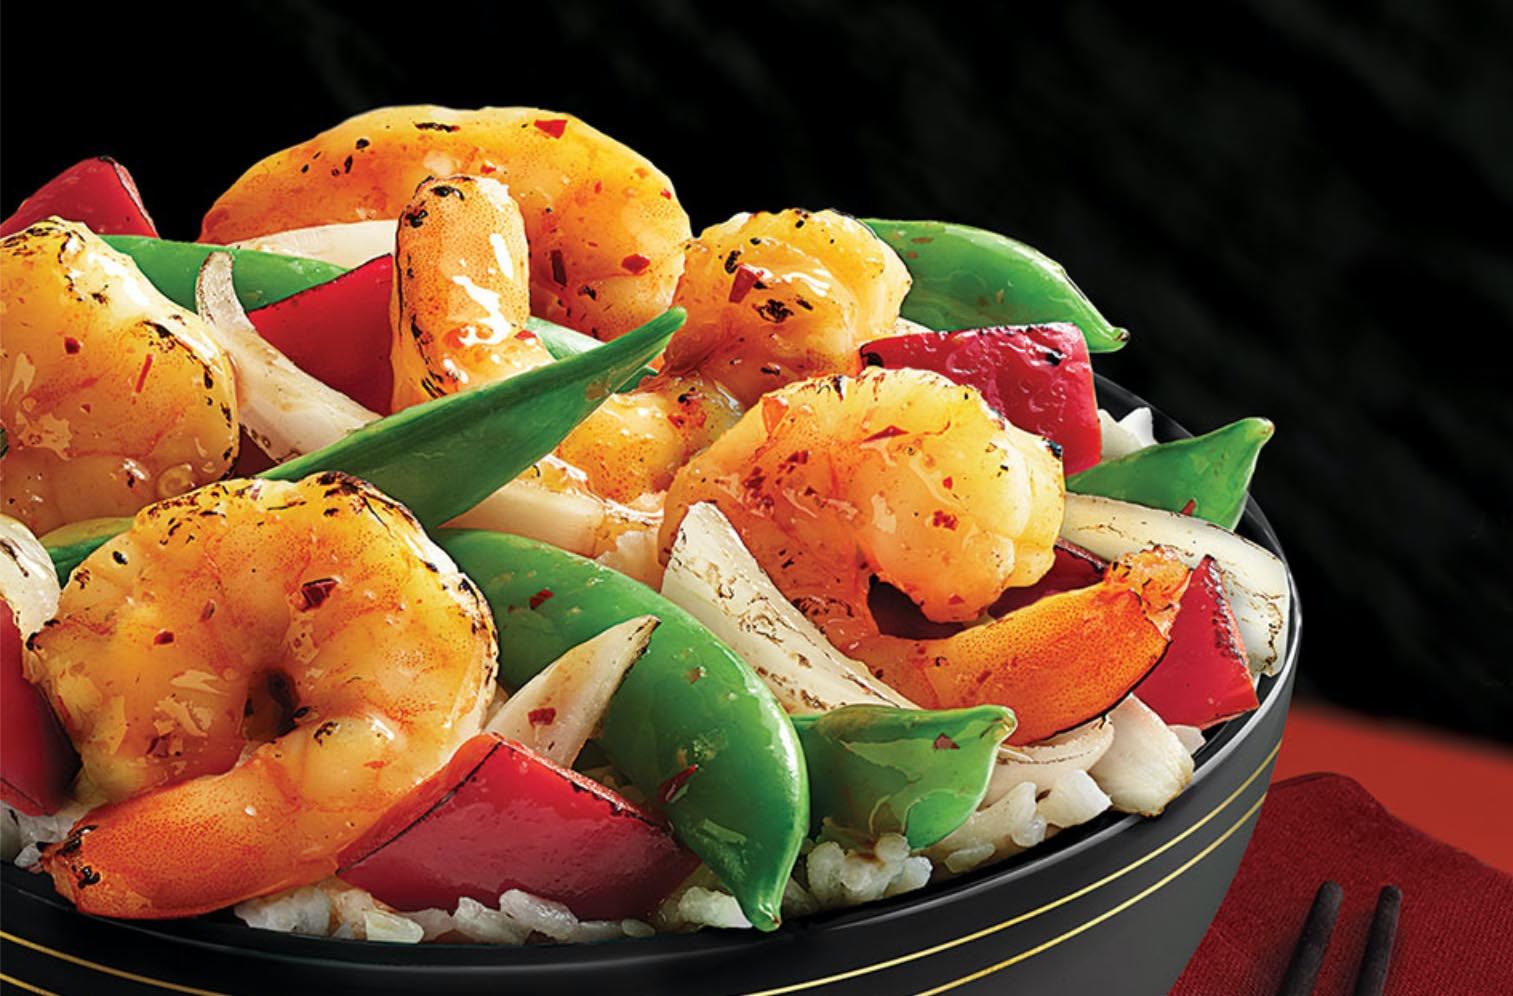 Panda Express Launches the Limited Time Return of Tasty Wok-Fired Shrimp